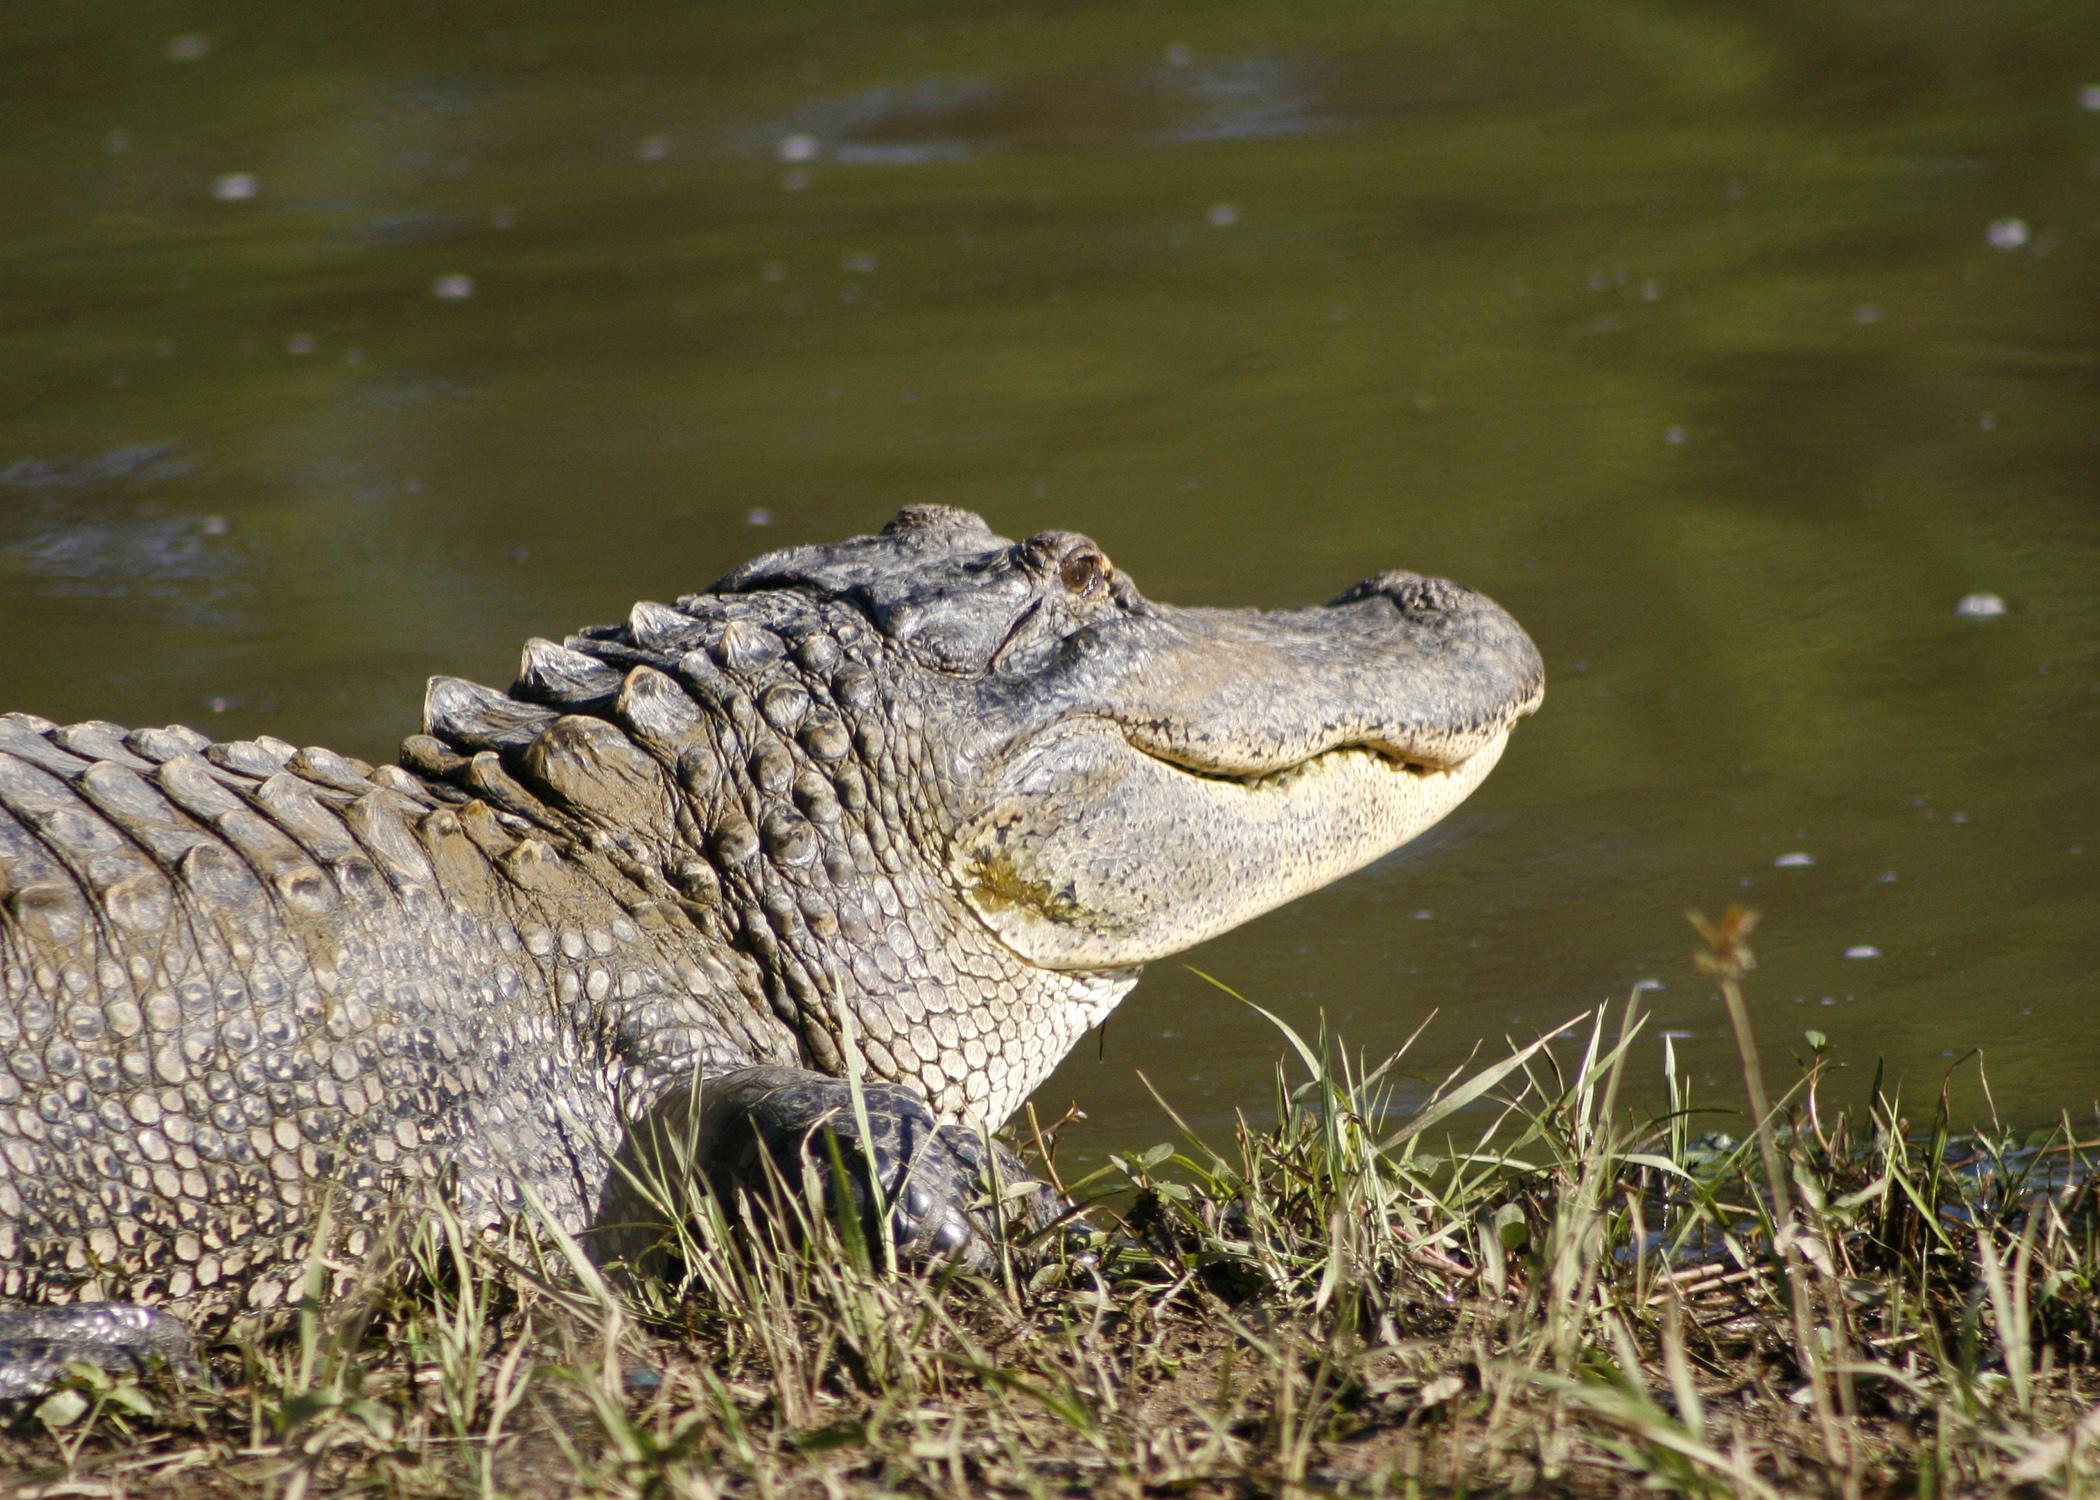 Alligators, such as this one at the Sam D. Hamilton Noxubee National Wildlife Refuge, are native to Mississippi and have rebounded from the endangered species list. (File photo by MSU Ag Communications/Kat Lawrence)